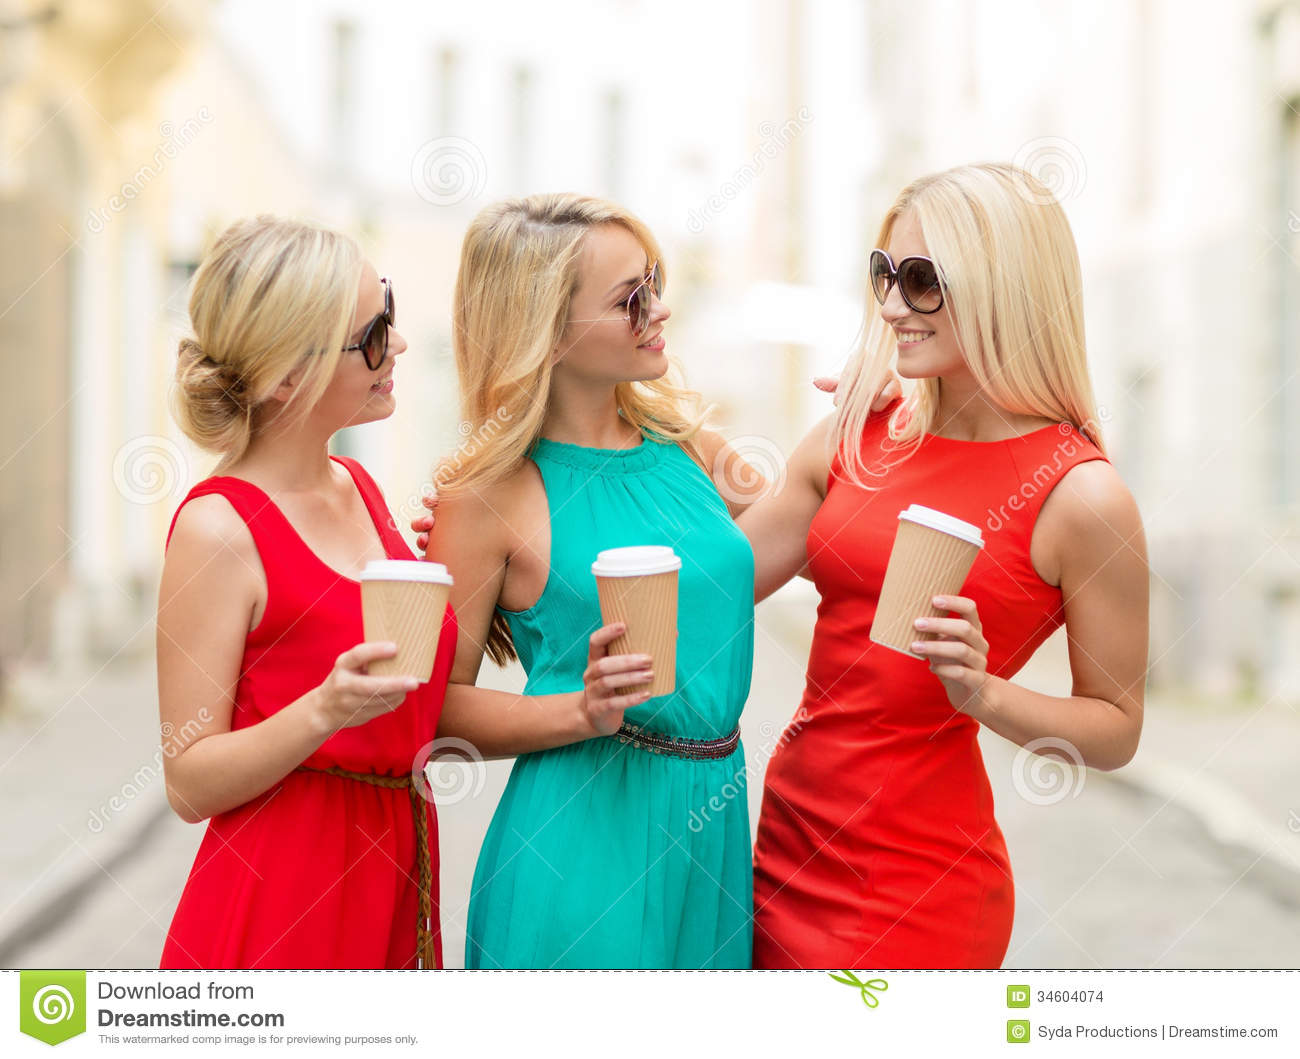 Girls Concept   Beautiful Women With Takeaway Coffee Cups In The City